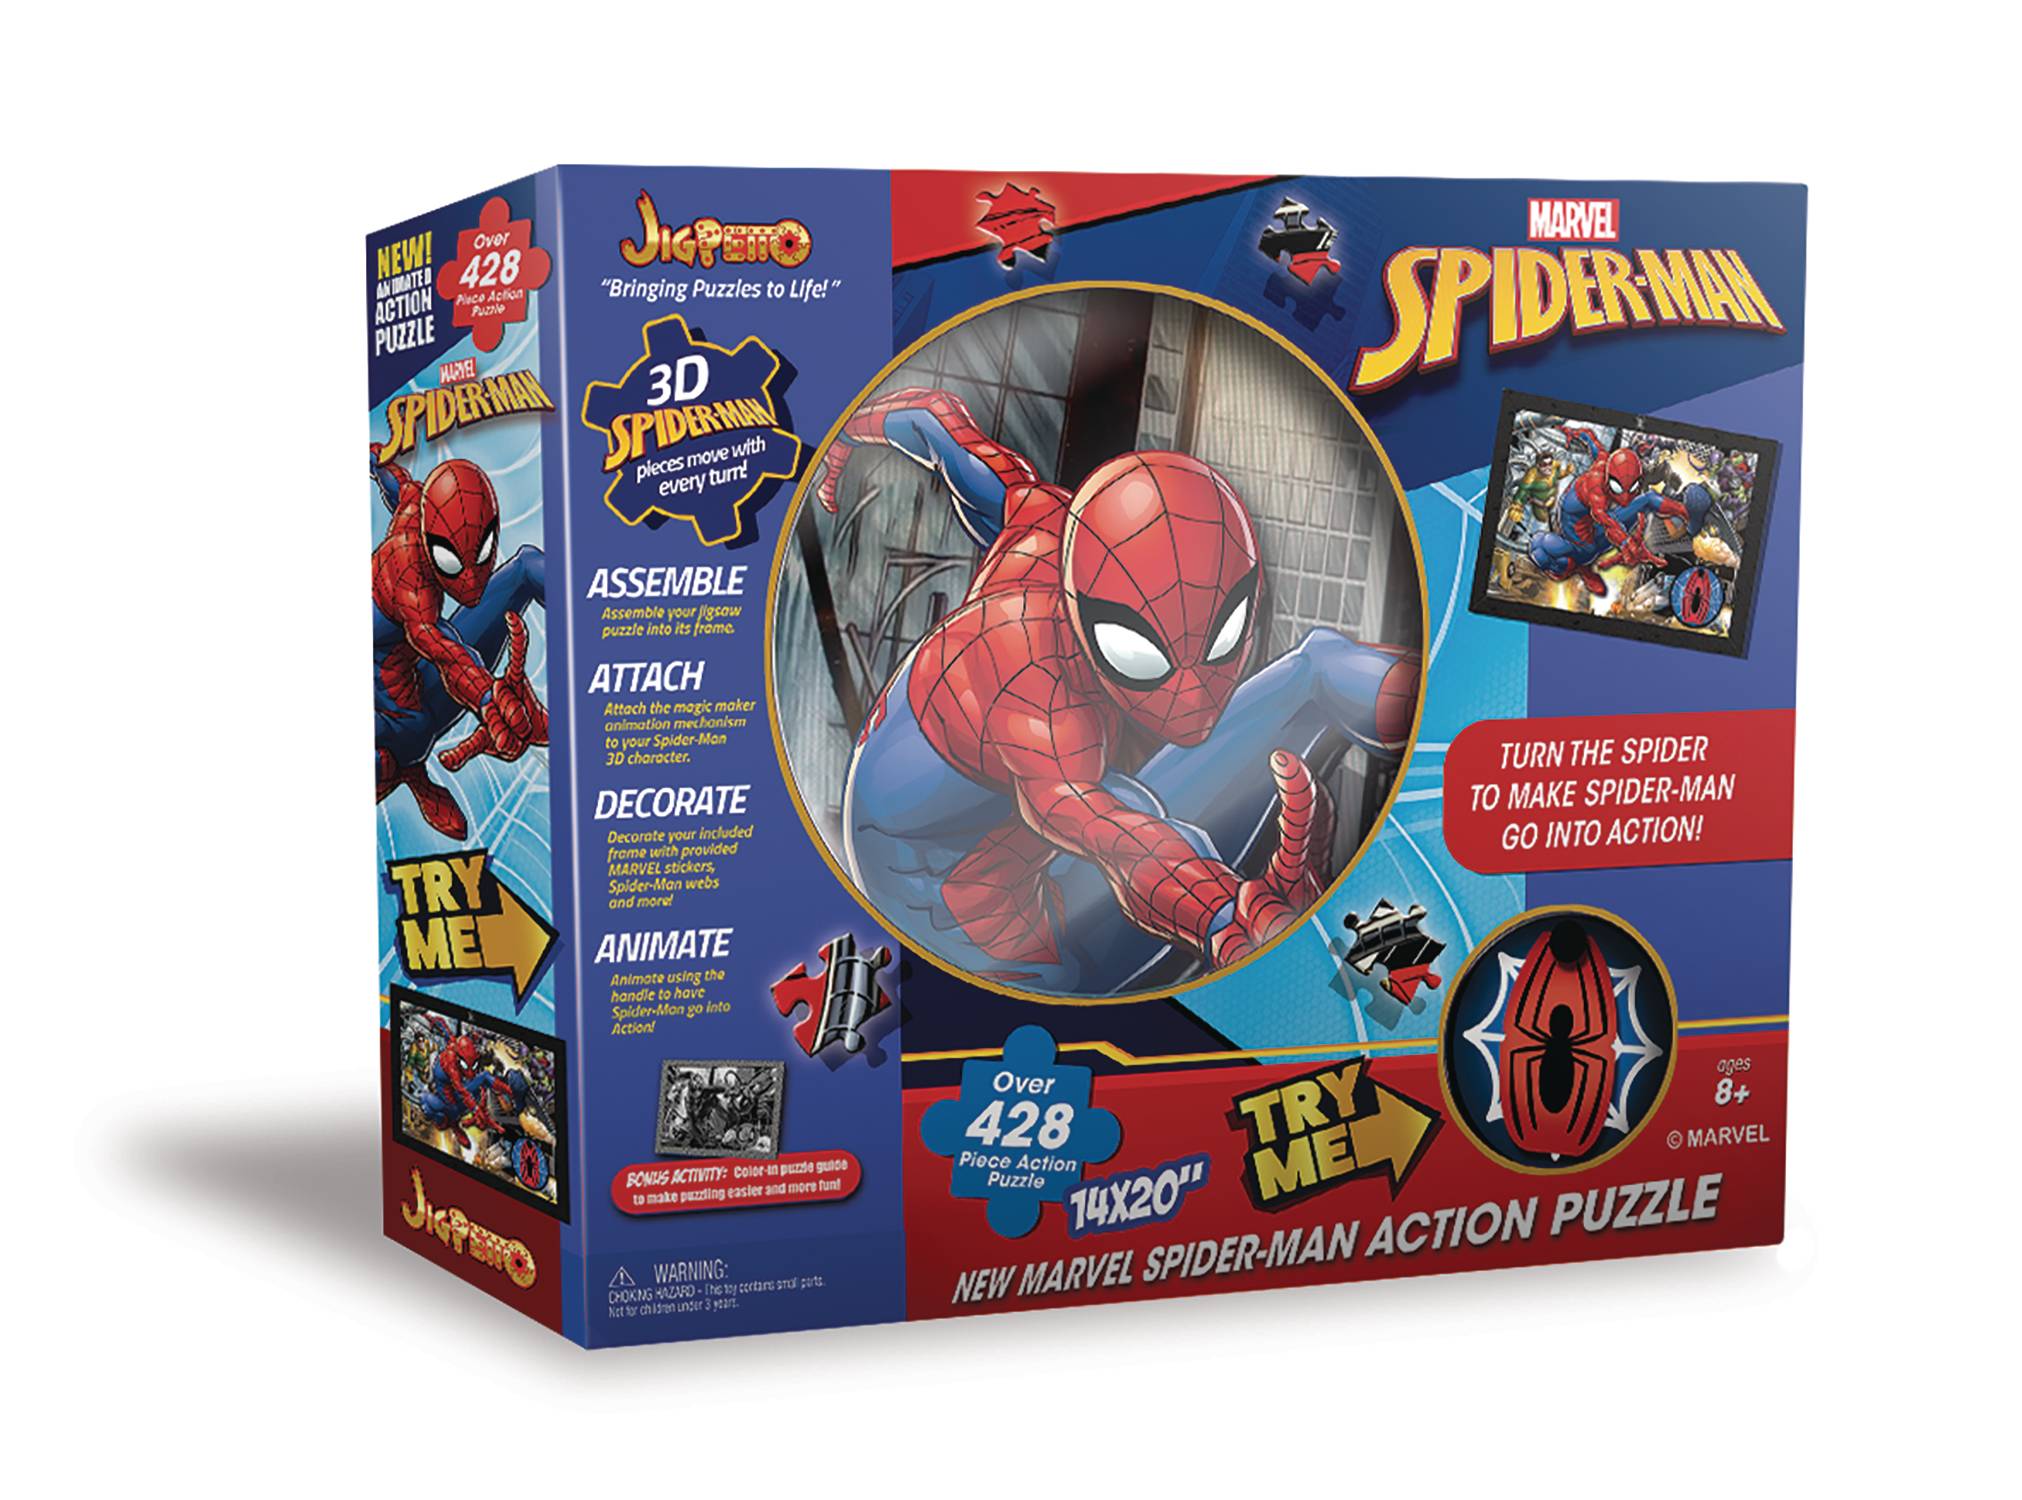 JAN238794 - MARVEL JIGPETTO ACTION PUZZLE SPIDER-MAN - Previews World